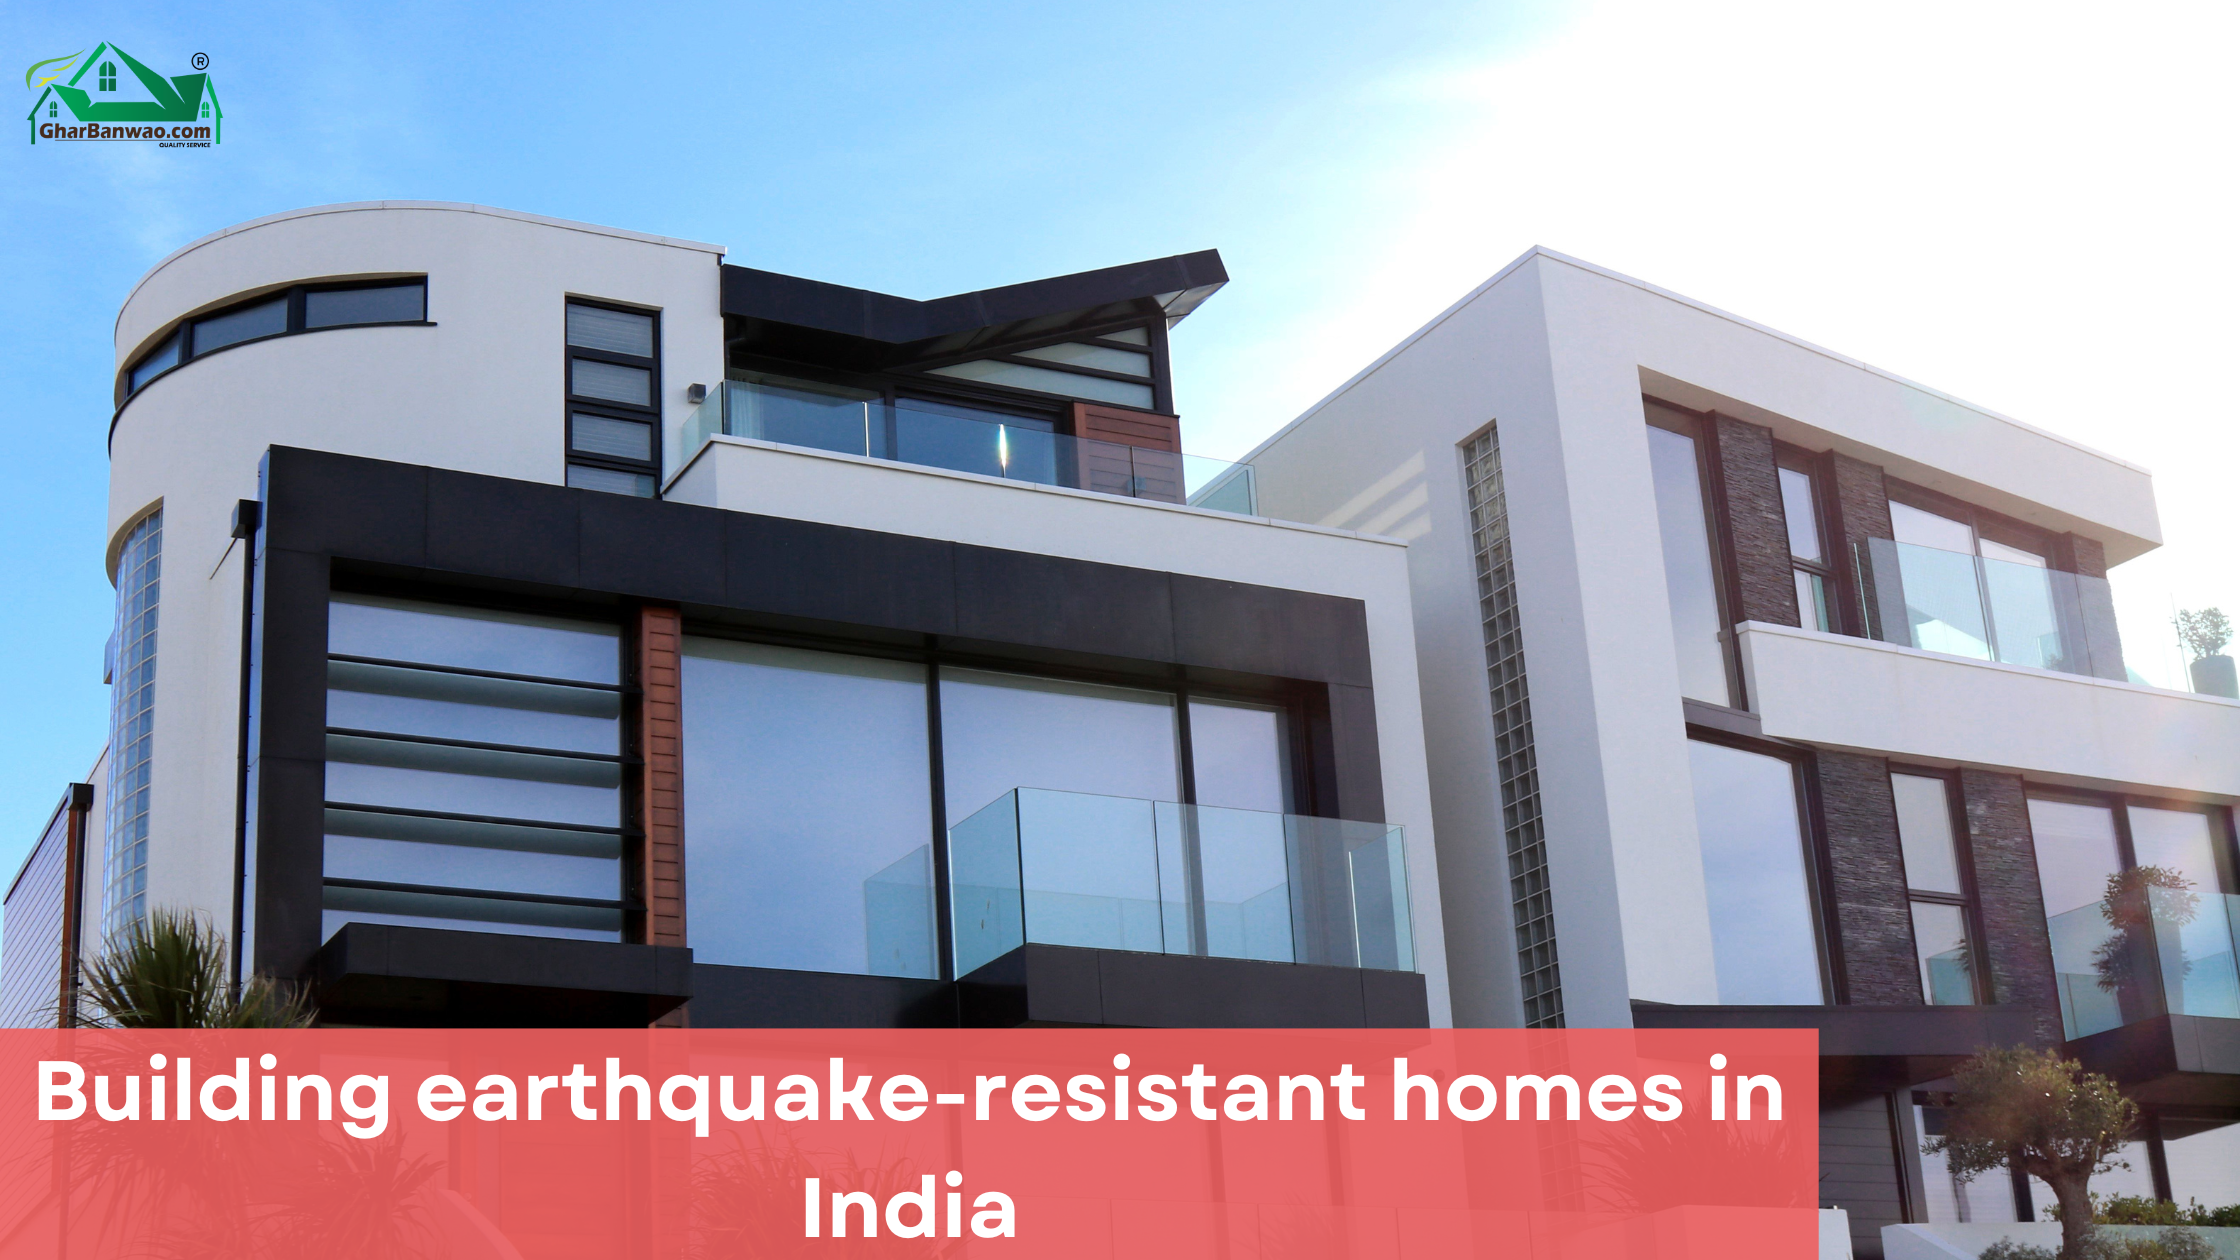 Building earthquake-resistant homes in India